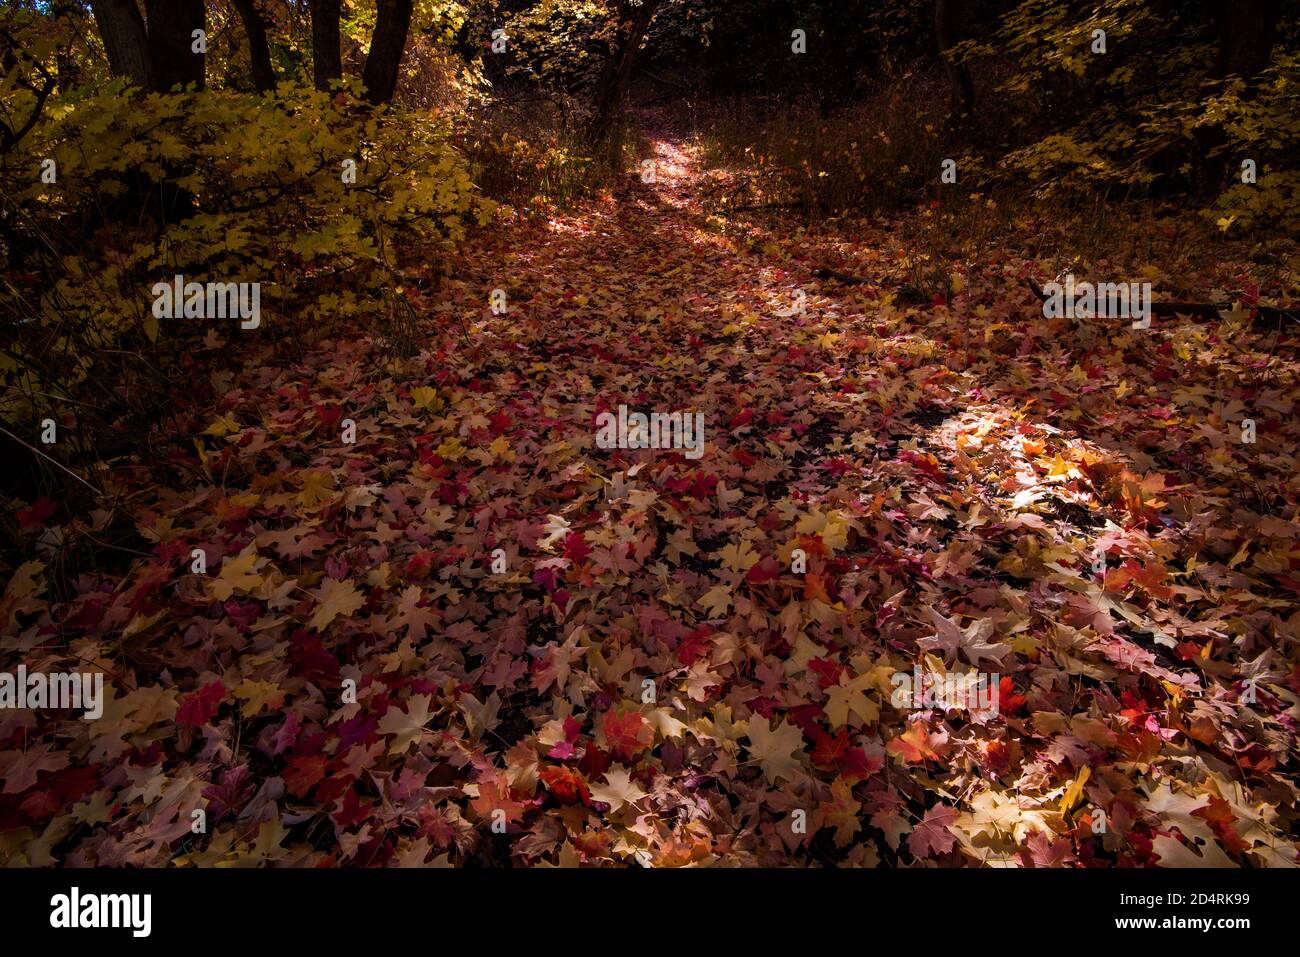 Fallen Autumn leaves on the forest floor.  The fall leaves create a carpet of color on the landscape, Stock Photo